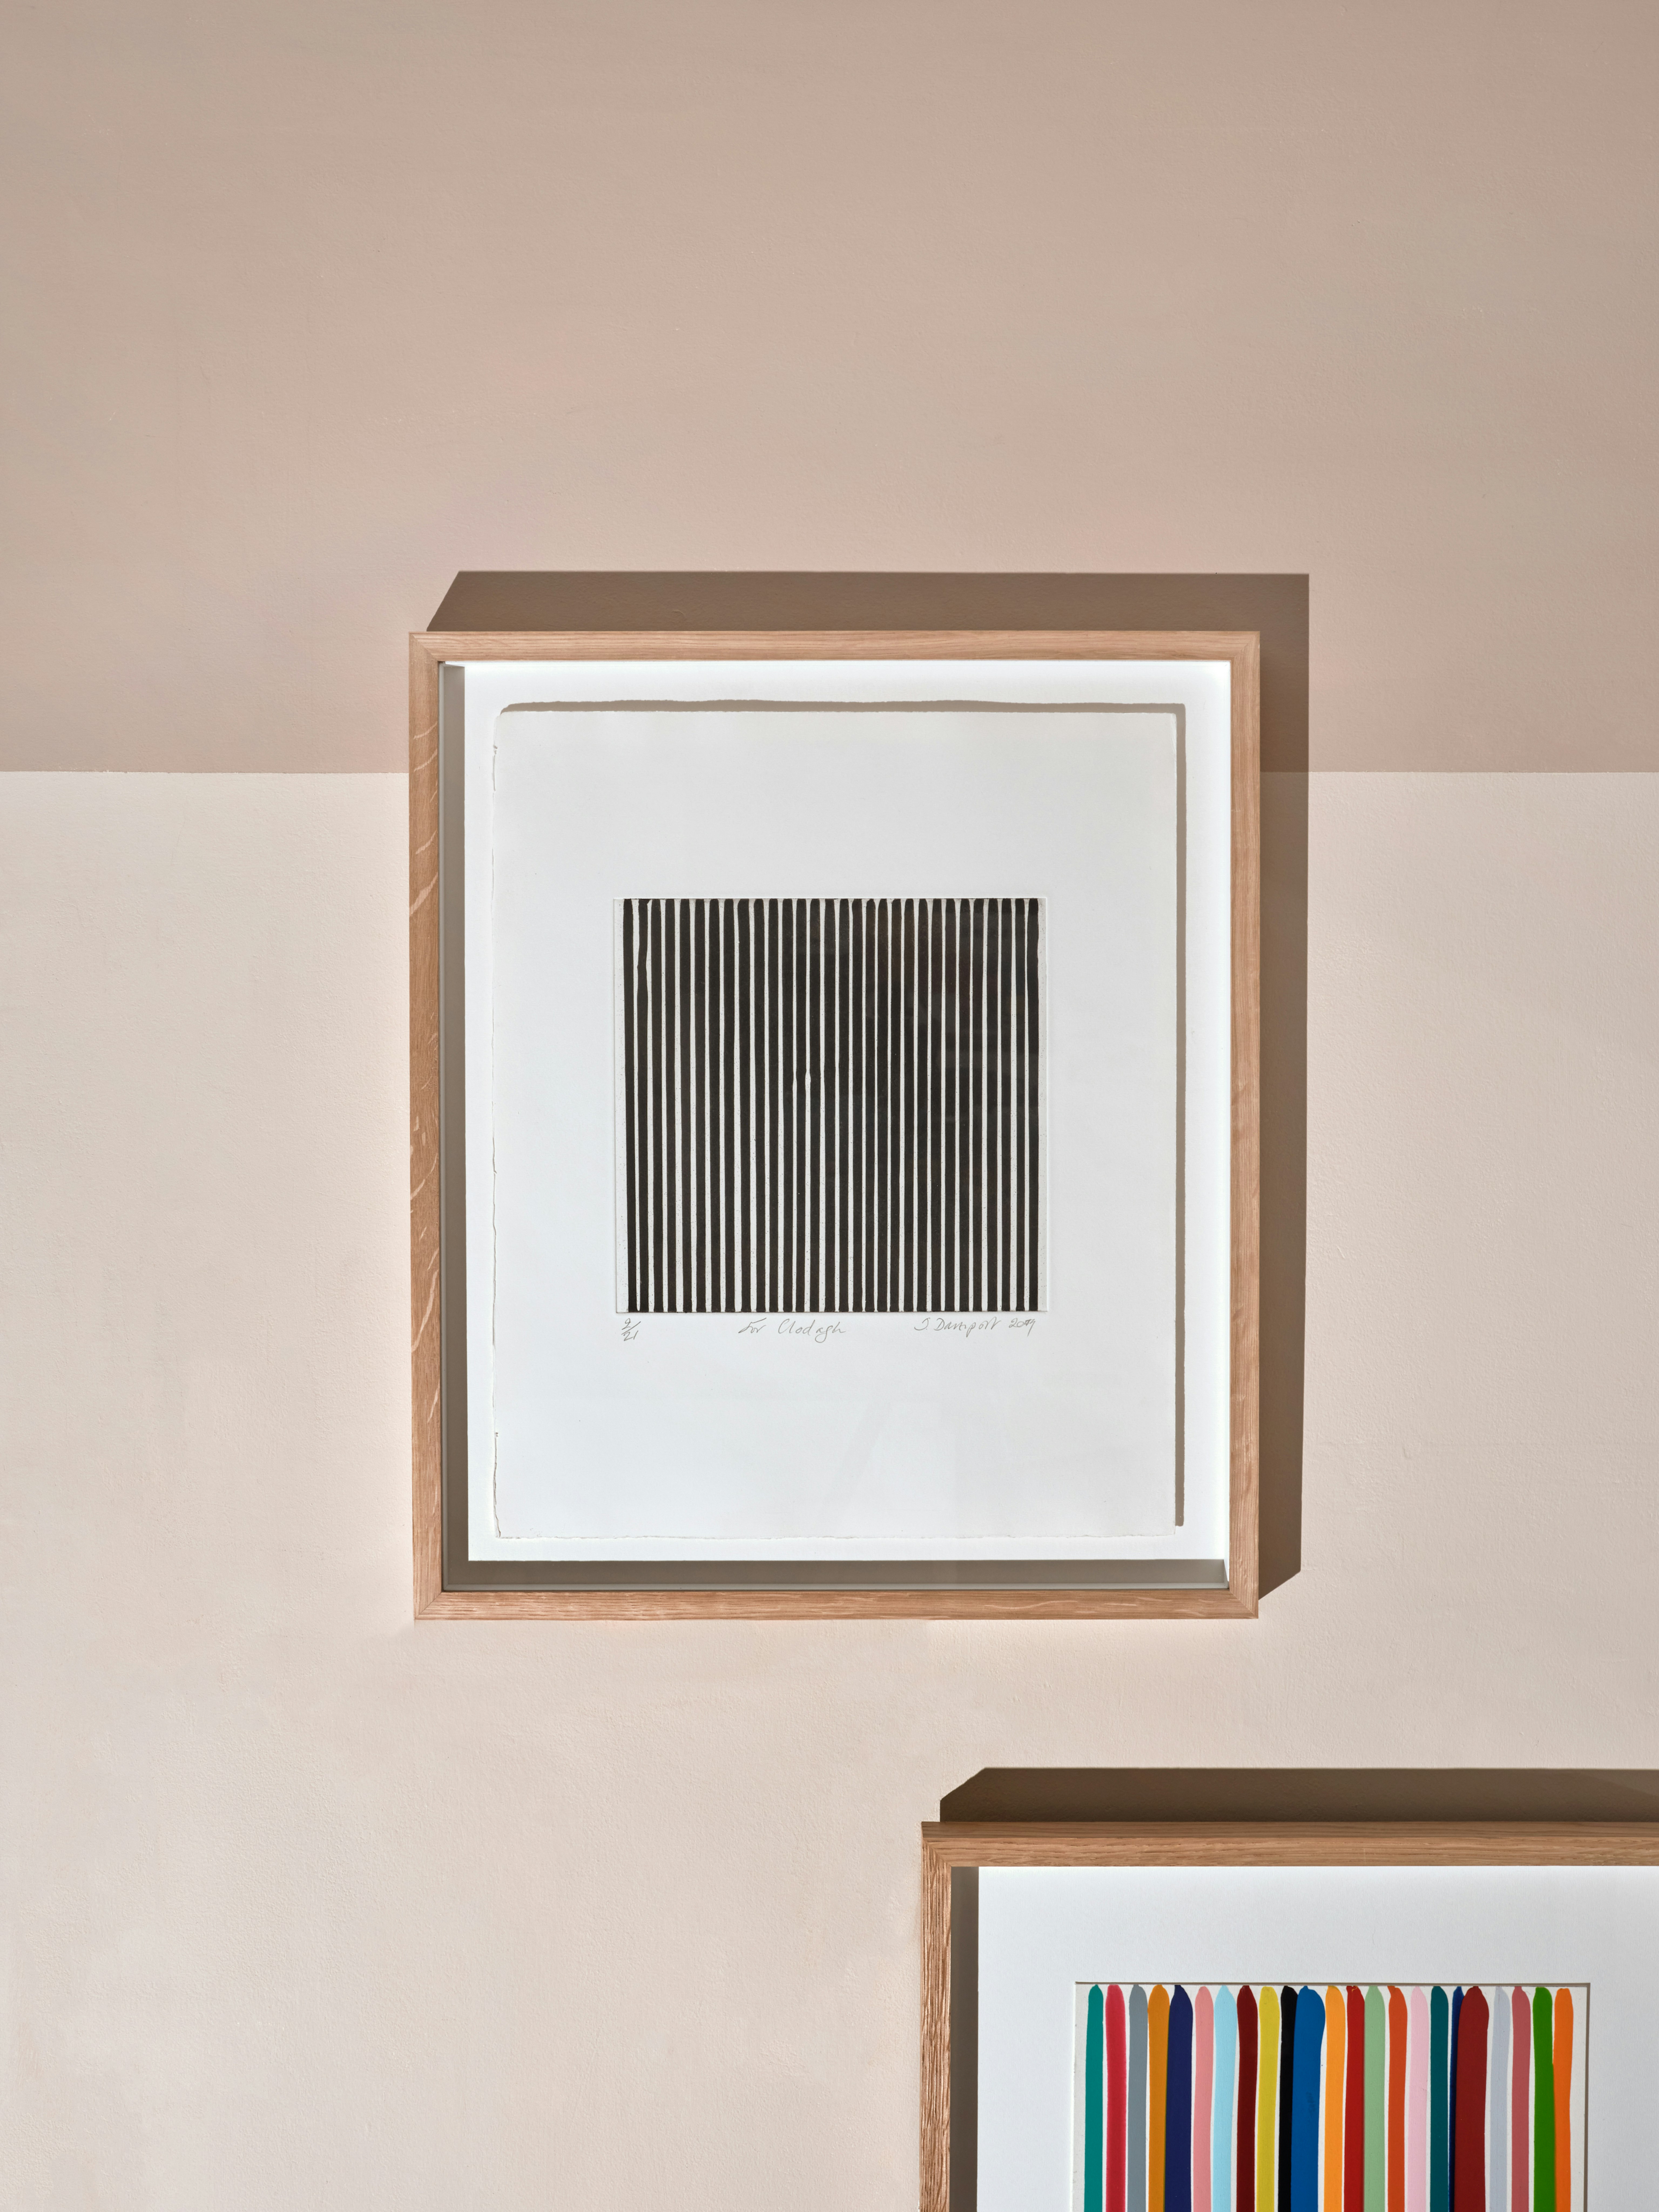 Composite installation shot of two framed works by Ian Davenport, etching with aquatint in black depicting the artist’s signature vertical poured lines, the other one acrylic with water-based paints depicting drip of multi colour vertical lines across sheet.